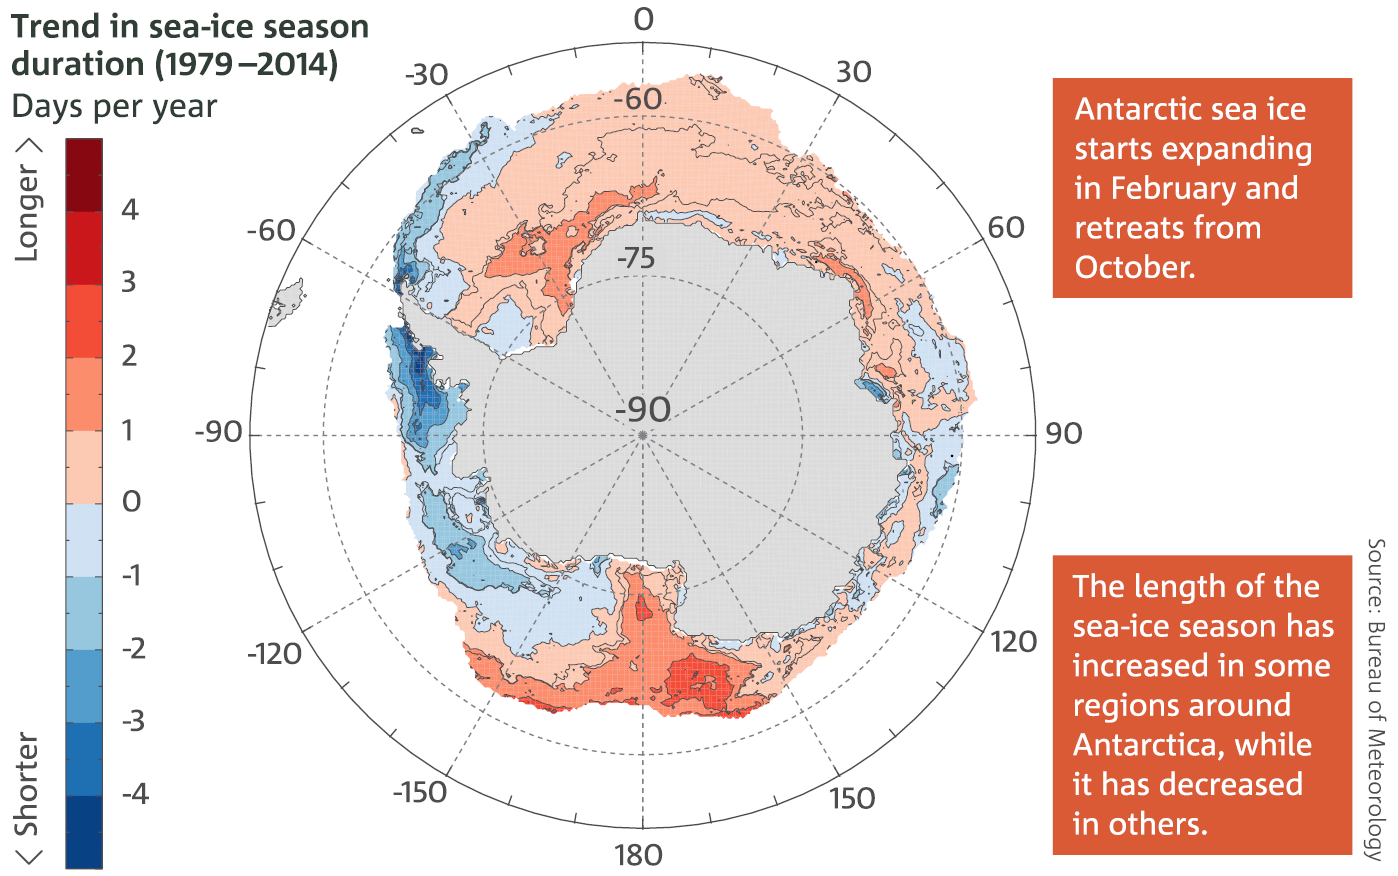 Trends in the length of the sea-ice season duration each year (in days per year) around Antarctica, 1979–2014.